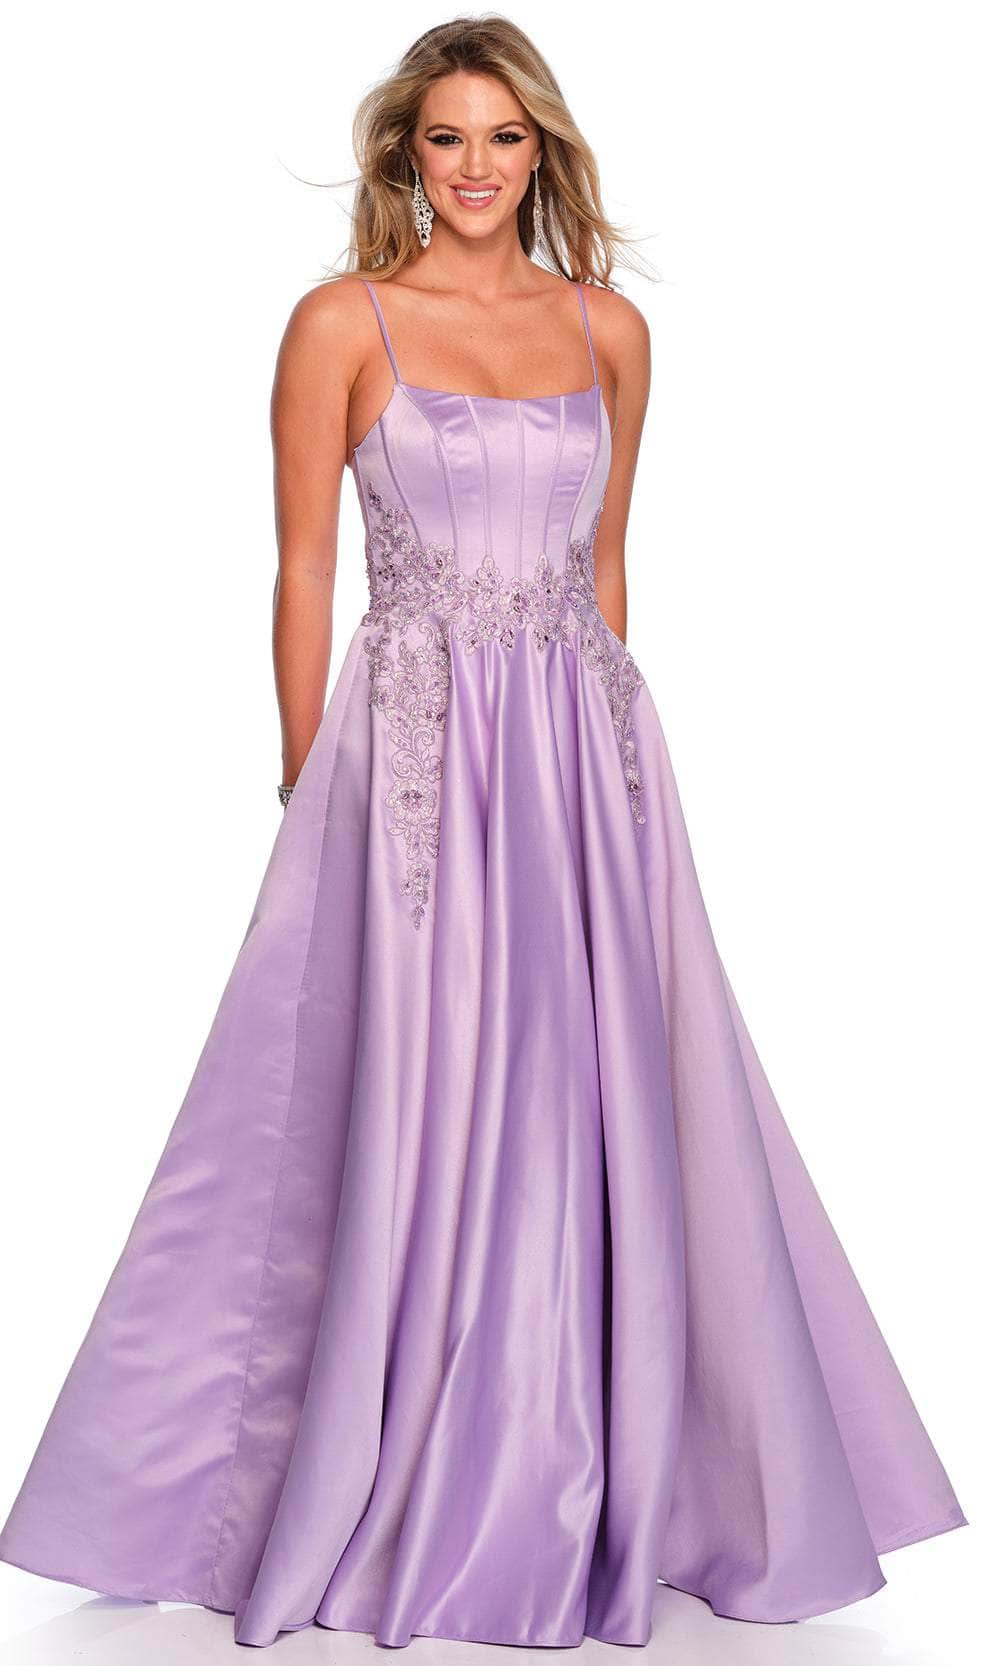 Image of Dave & Johnny 11338 - Embroidered Scoop Neck Prom Gown